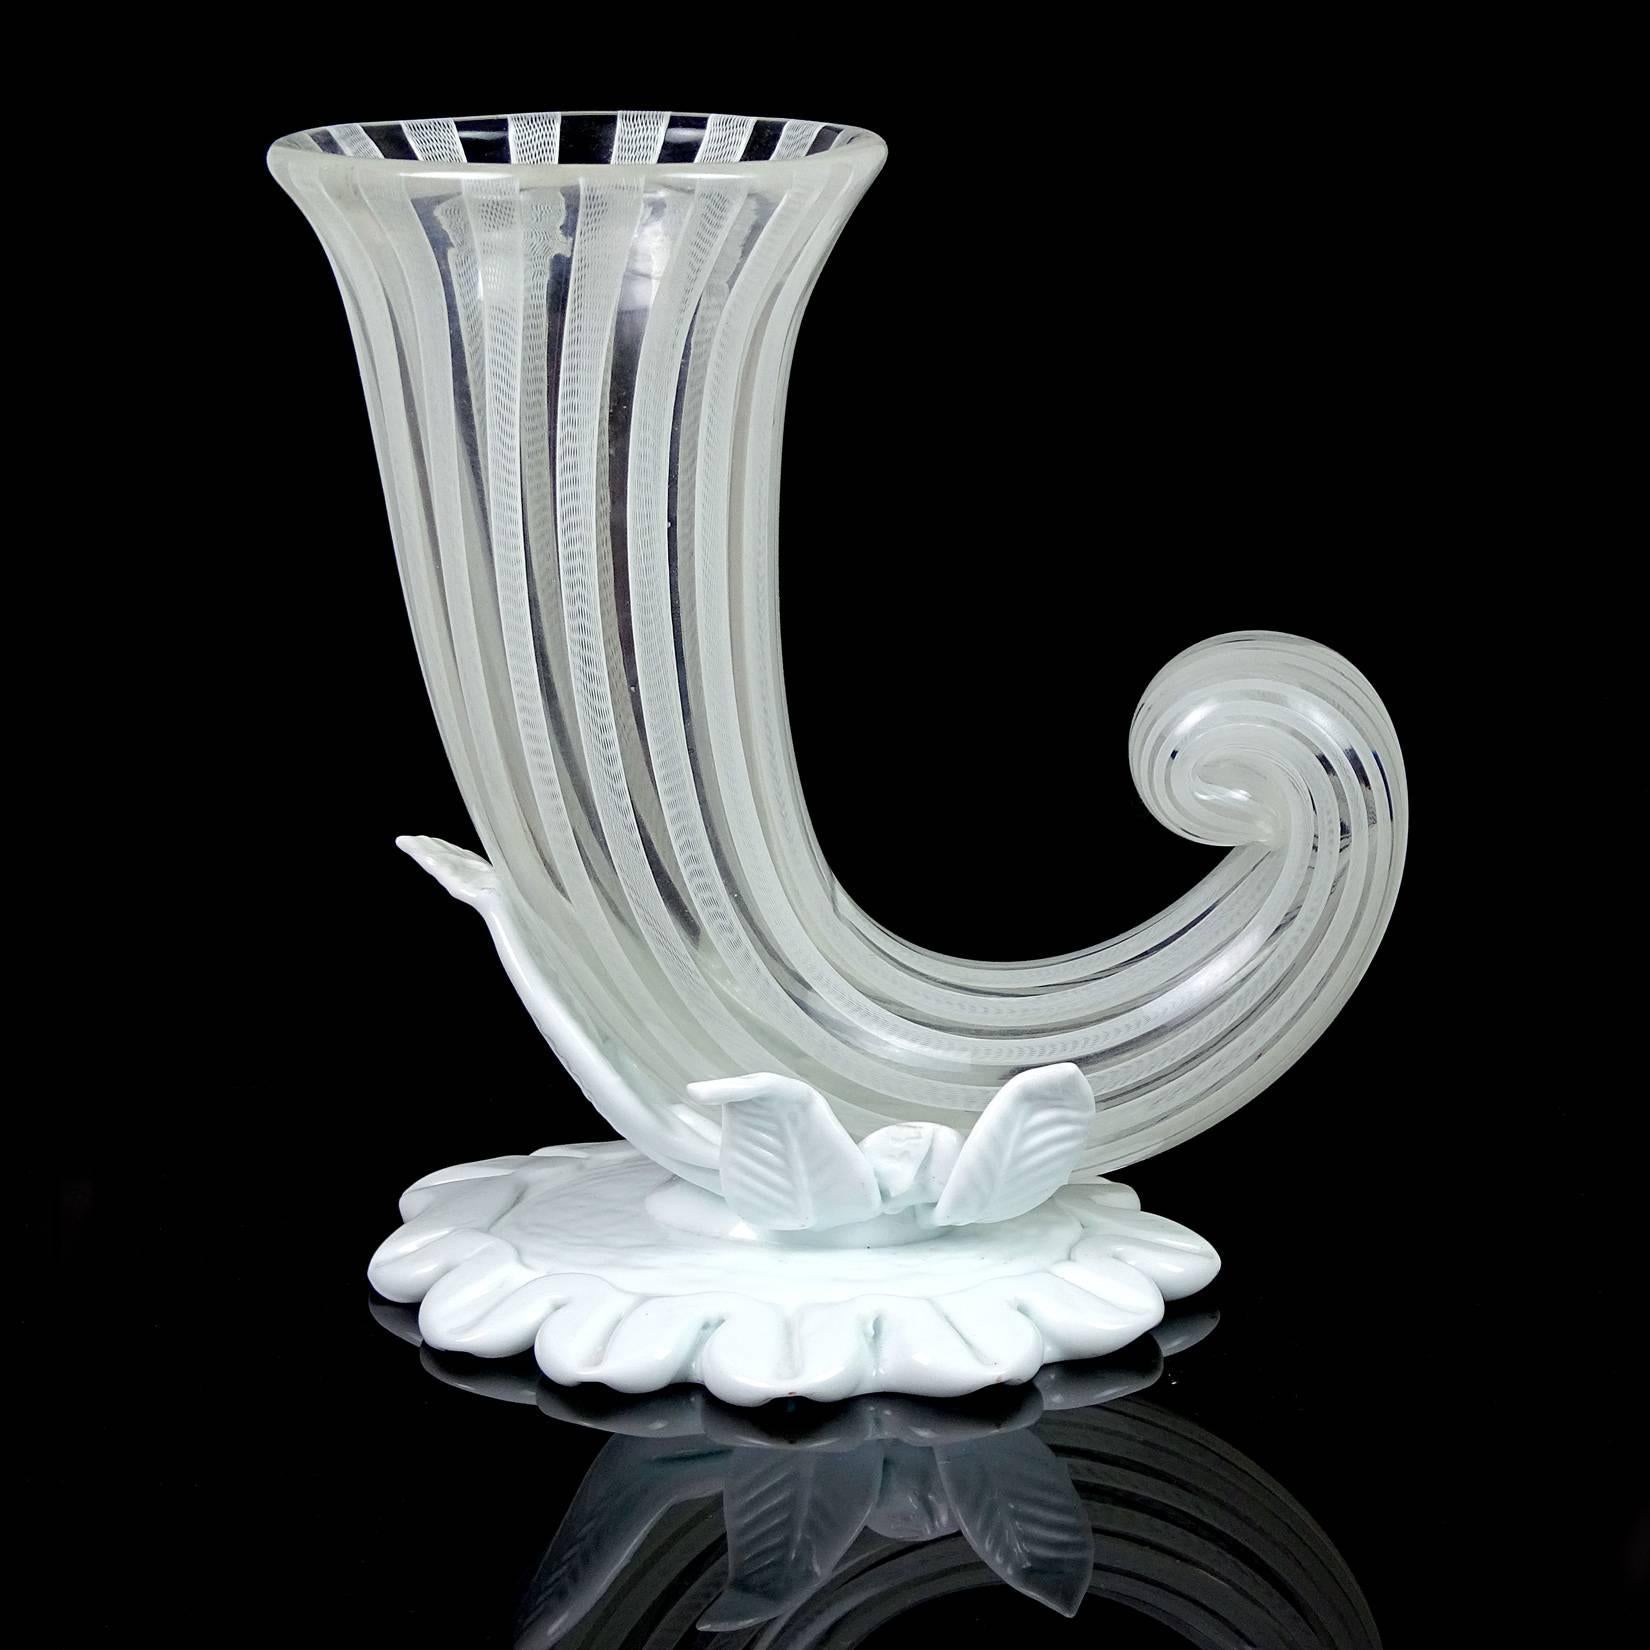 Beautiful and rare, vintage Murano hand blown white with ribbons Italian art glass cornucopia flower vase. Documented design to Fulvio Bianconi for the Venini company, circa 1948, but the signature indicates a later production of 1960s. The vase is